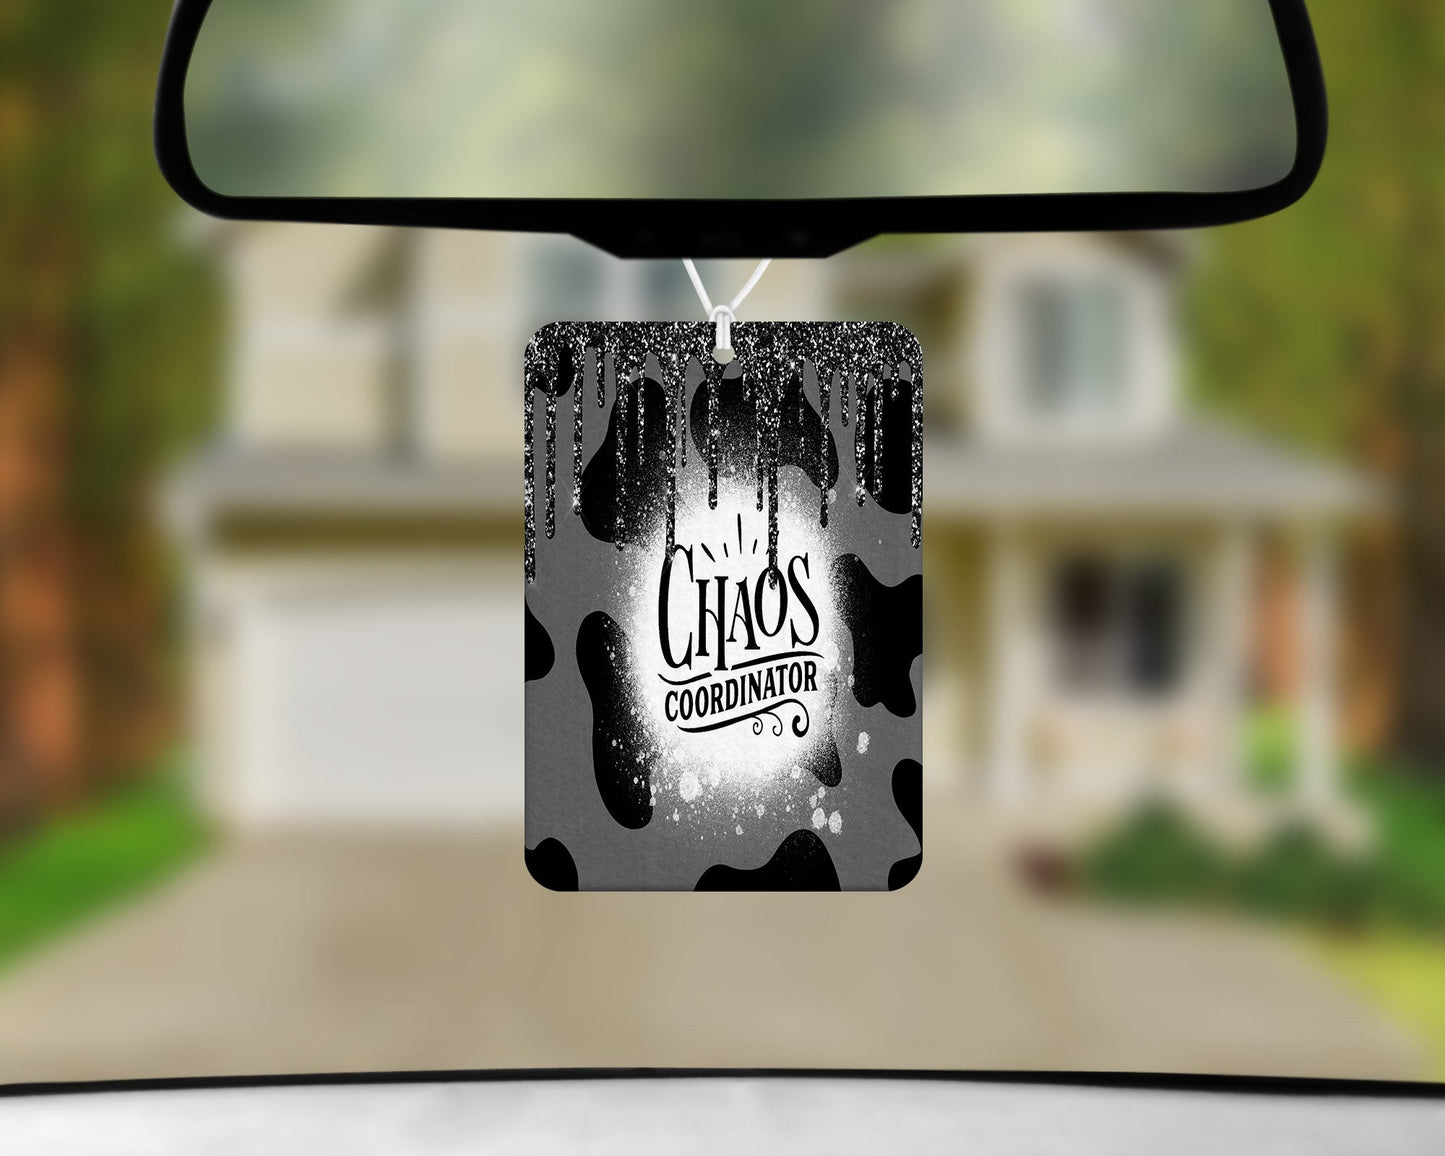 Chaos Coordinator|Freshie|Includes Scent Bottle - Vehicle Air Freshener